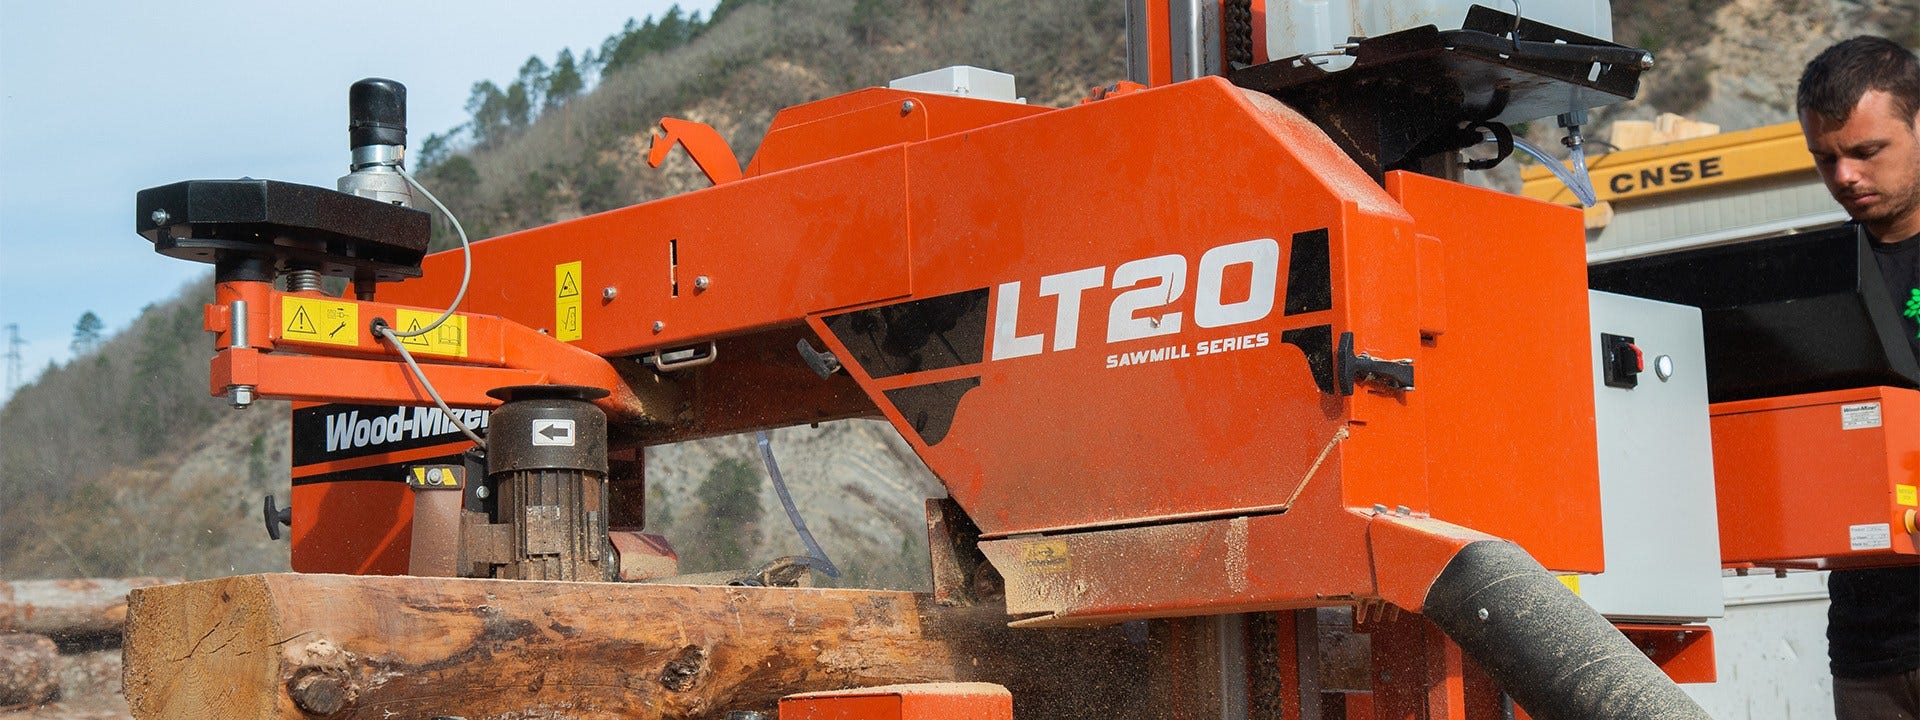 Restoring Family Sawmilling Business with Wood-Mizer LT20 in Cote d’Azur, France